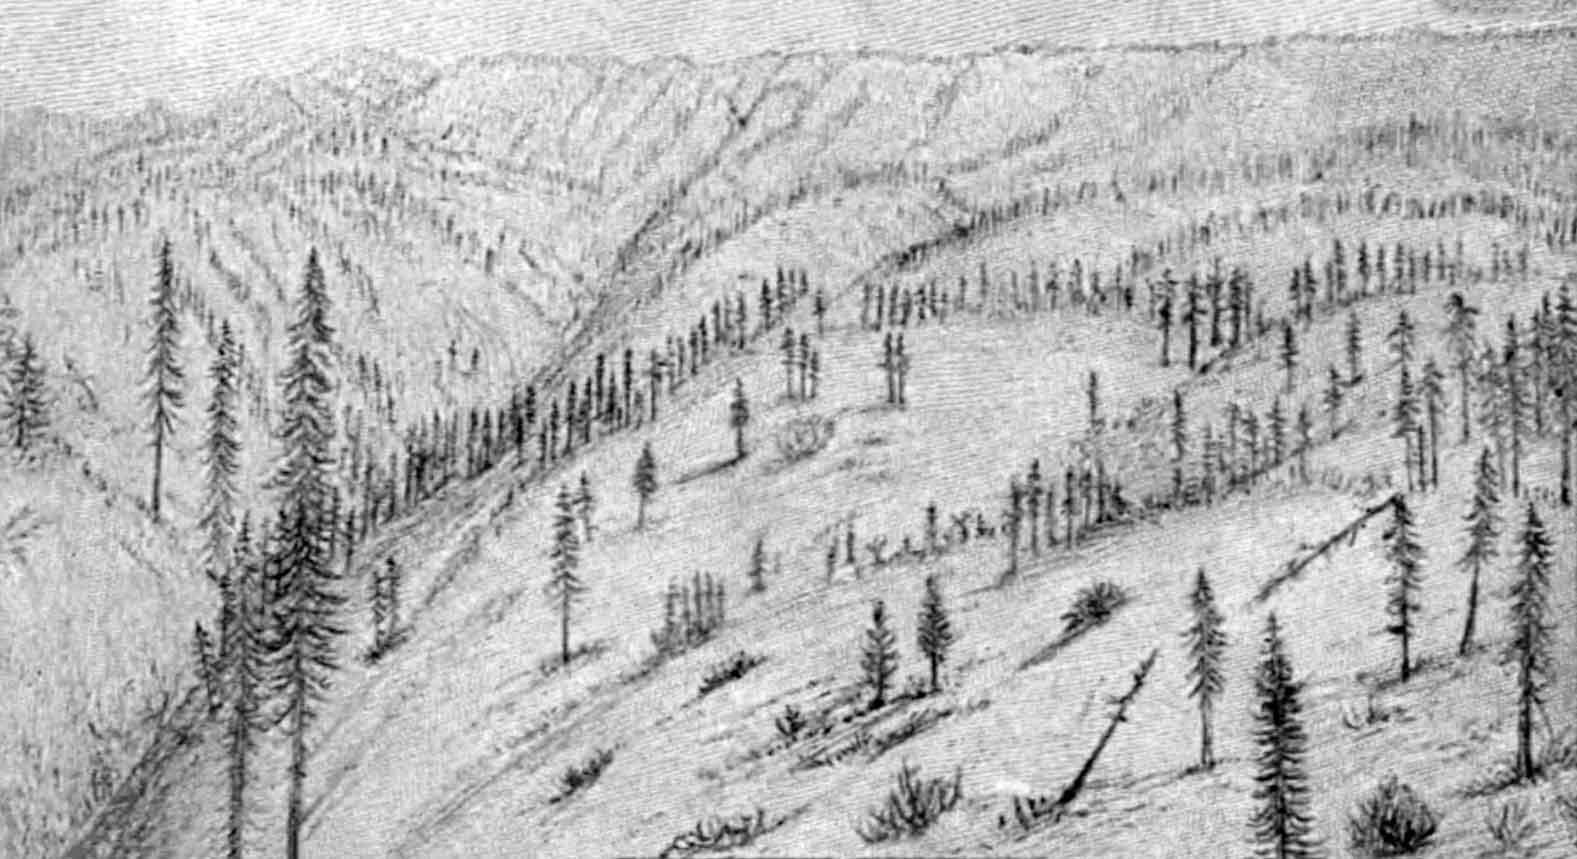 A drawing of a high mountain ridge that stretches across the horizon. In the foreground there are a few tall, thin fir trees.